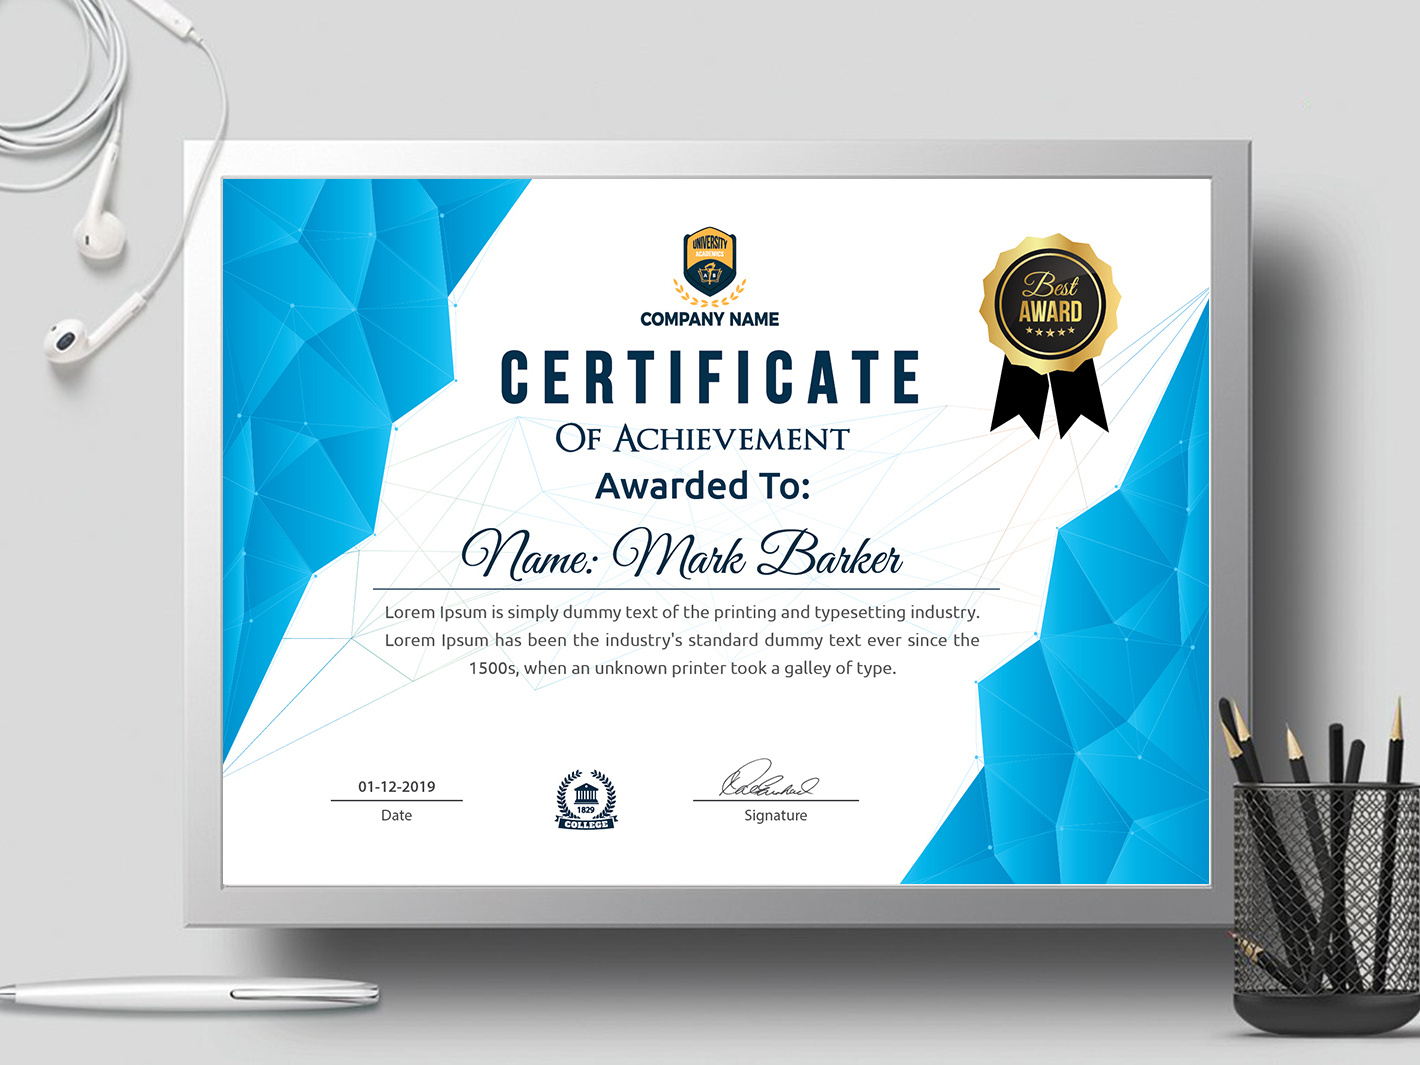 Certificate Templatecreative Touch On Dribbble With Regard To Landscape Certificate Templates